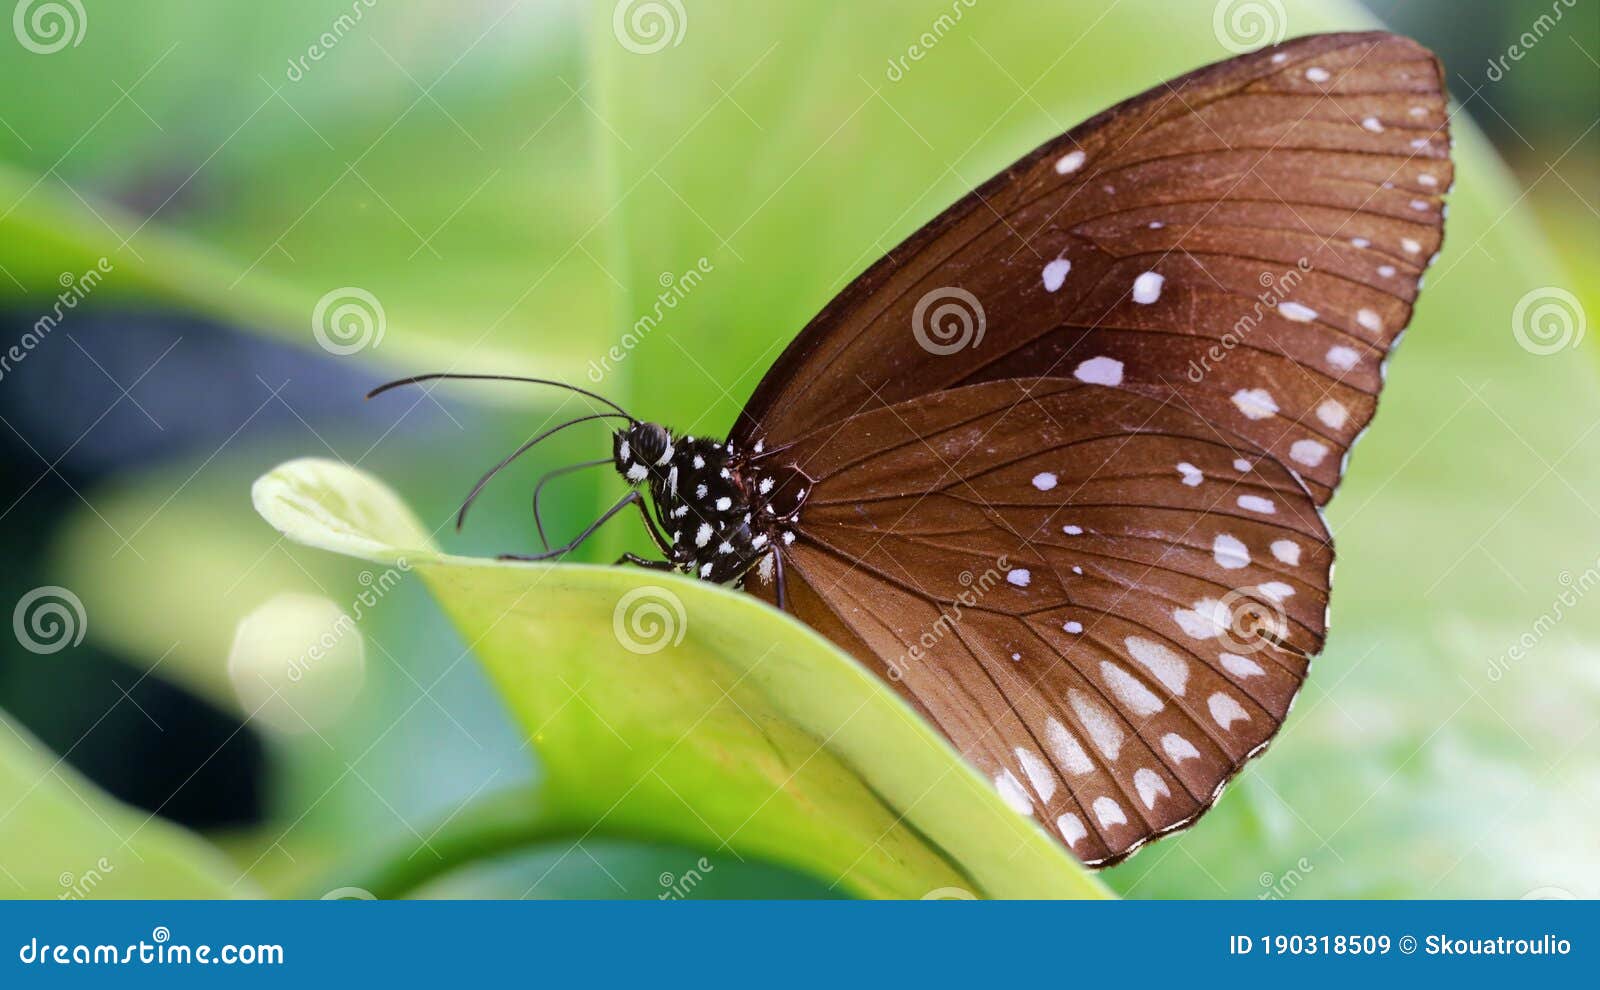 brown butterfly resting on a green leaf, this fragile lepidoptera has wide wings and long antennas